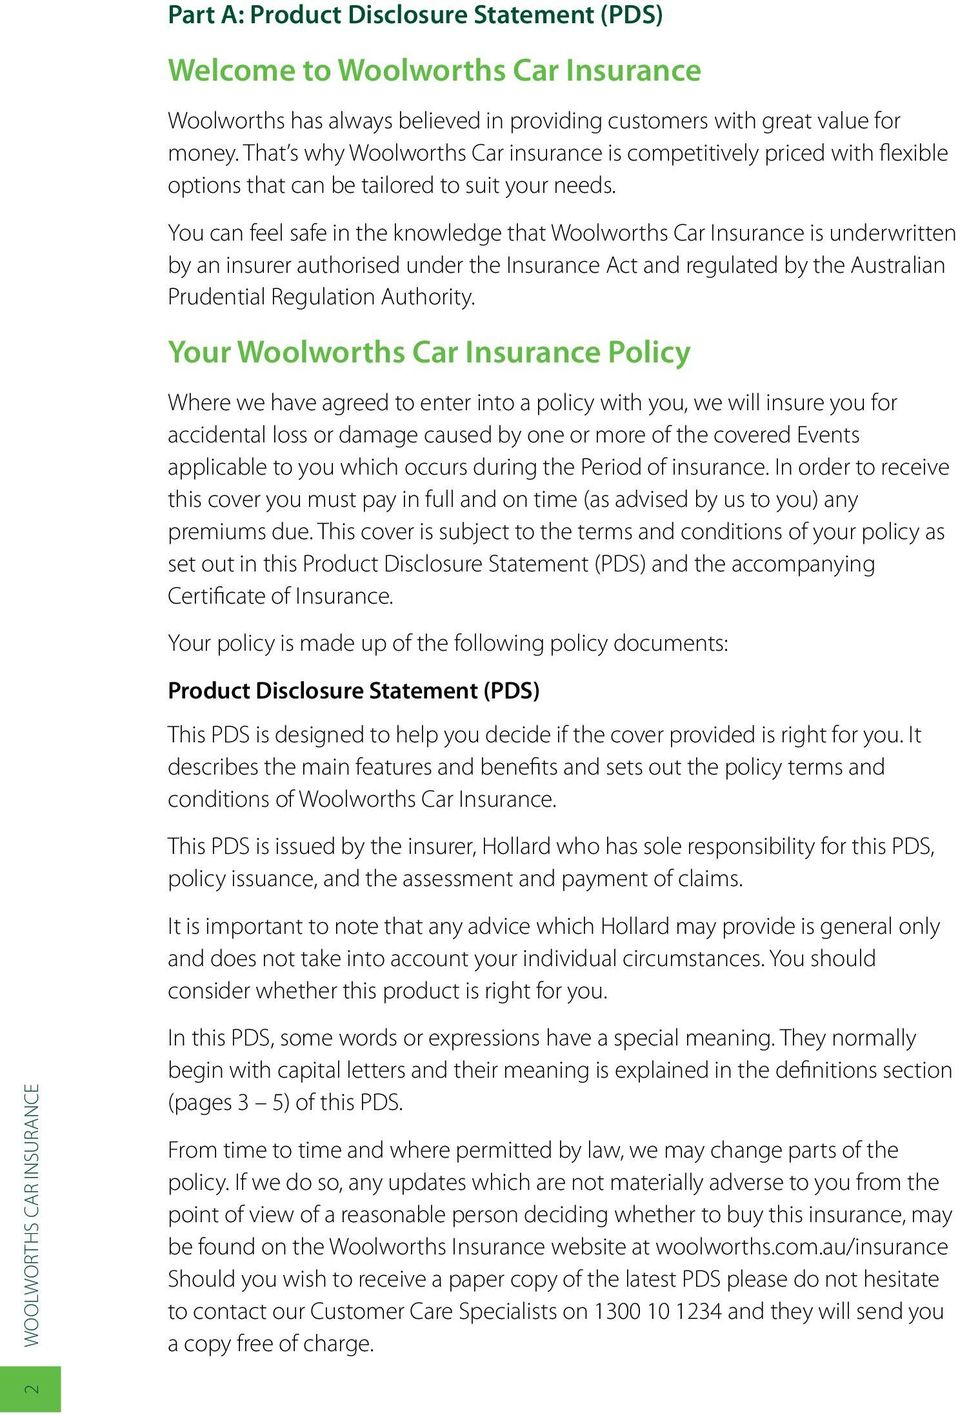 Woolworths Car Insurance Combined Product Disclosure throughout size 960 X 1415